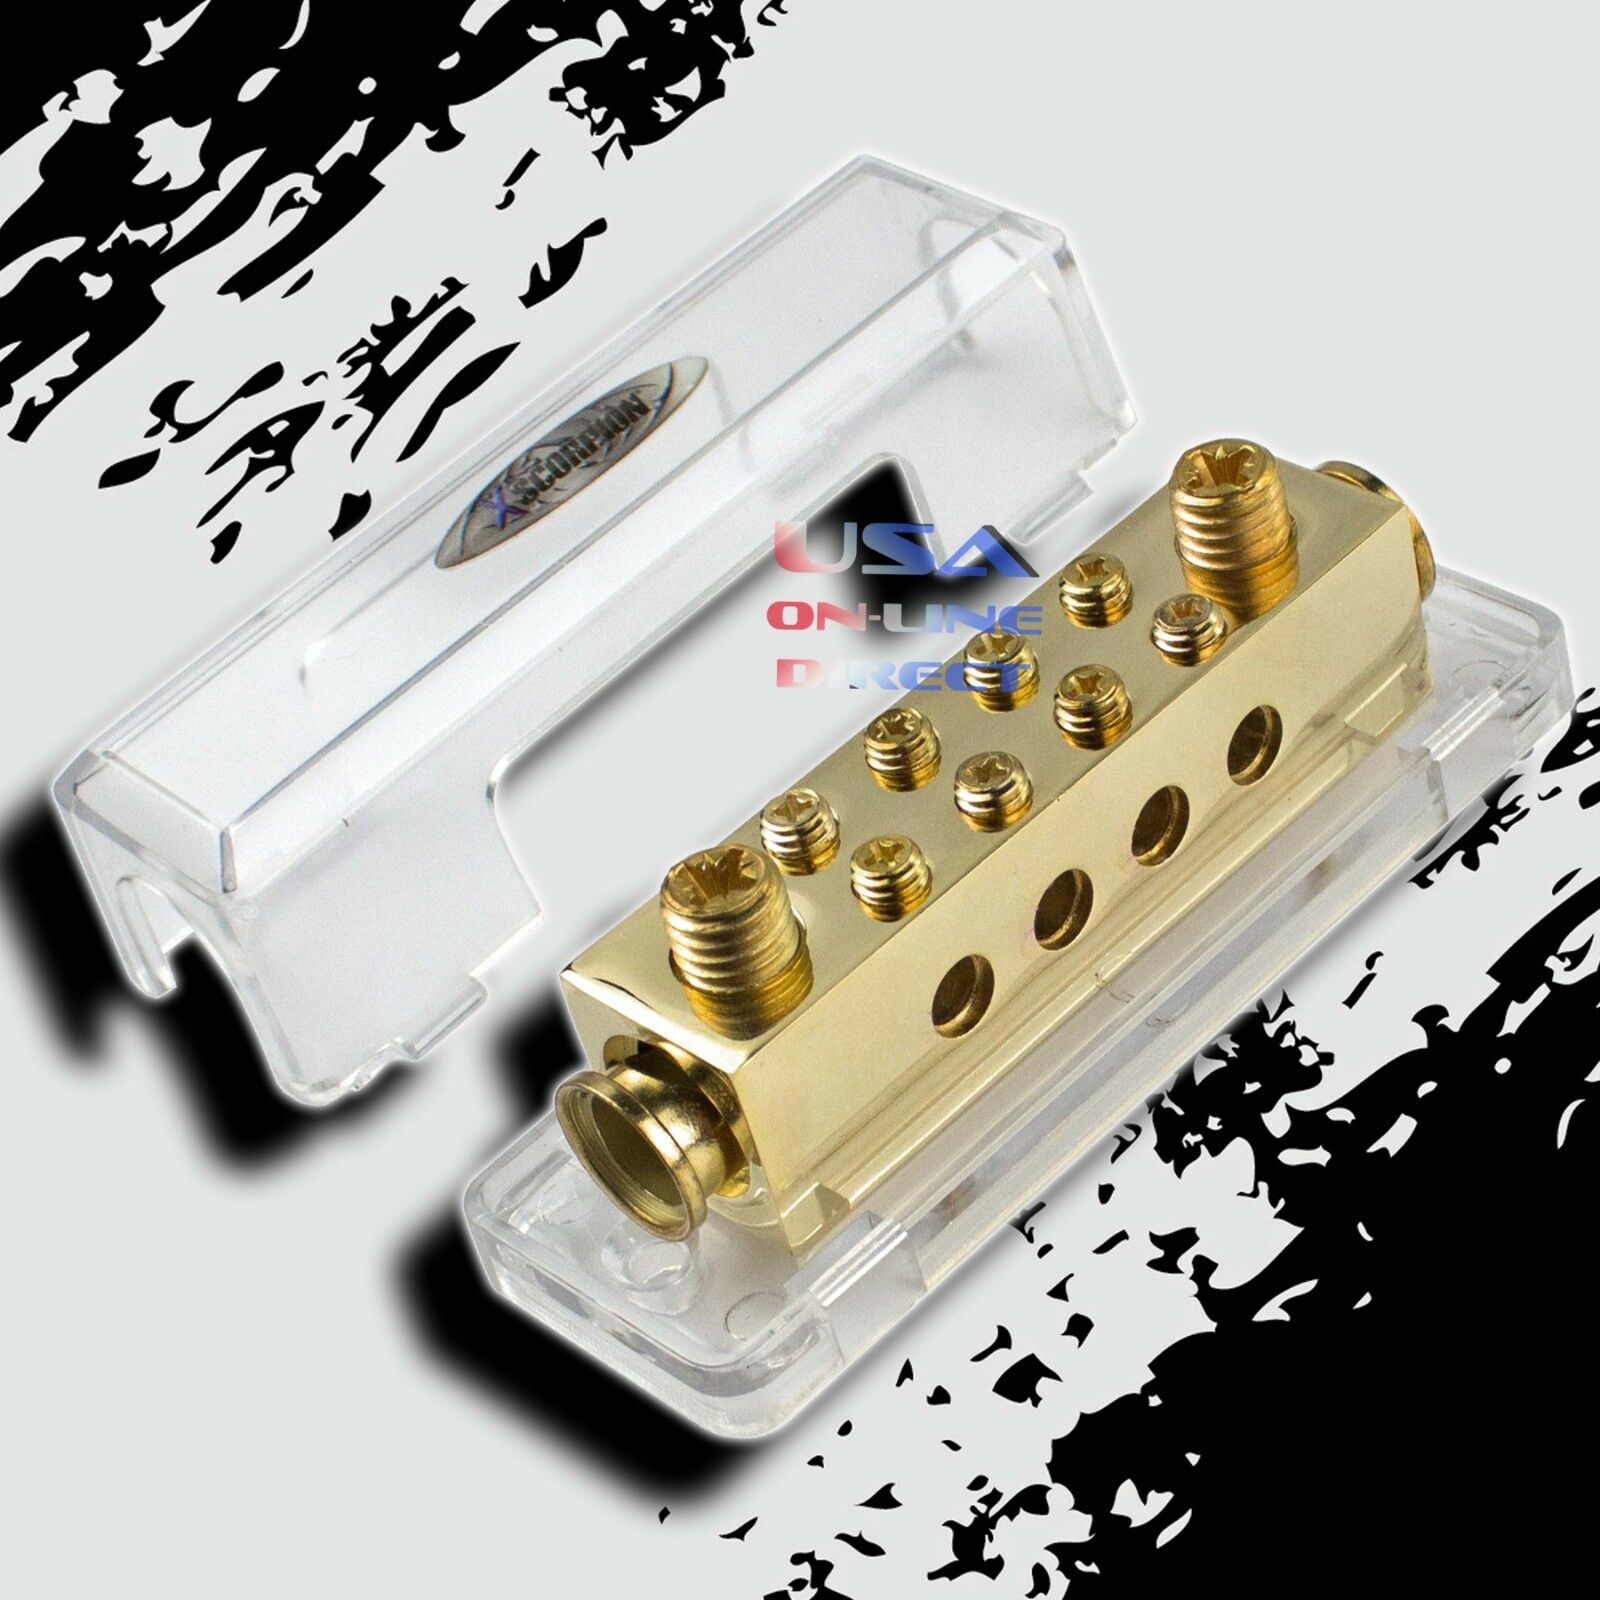 Gold Ground Distribution Block Two 0/2 Gauge Wire Awg 12v Inputs 8ga Output